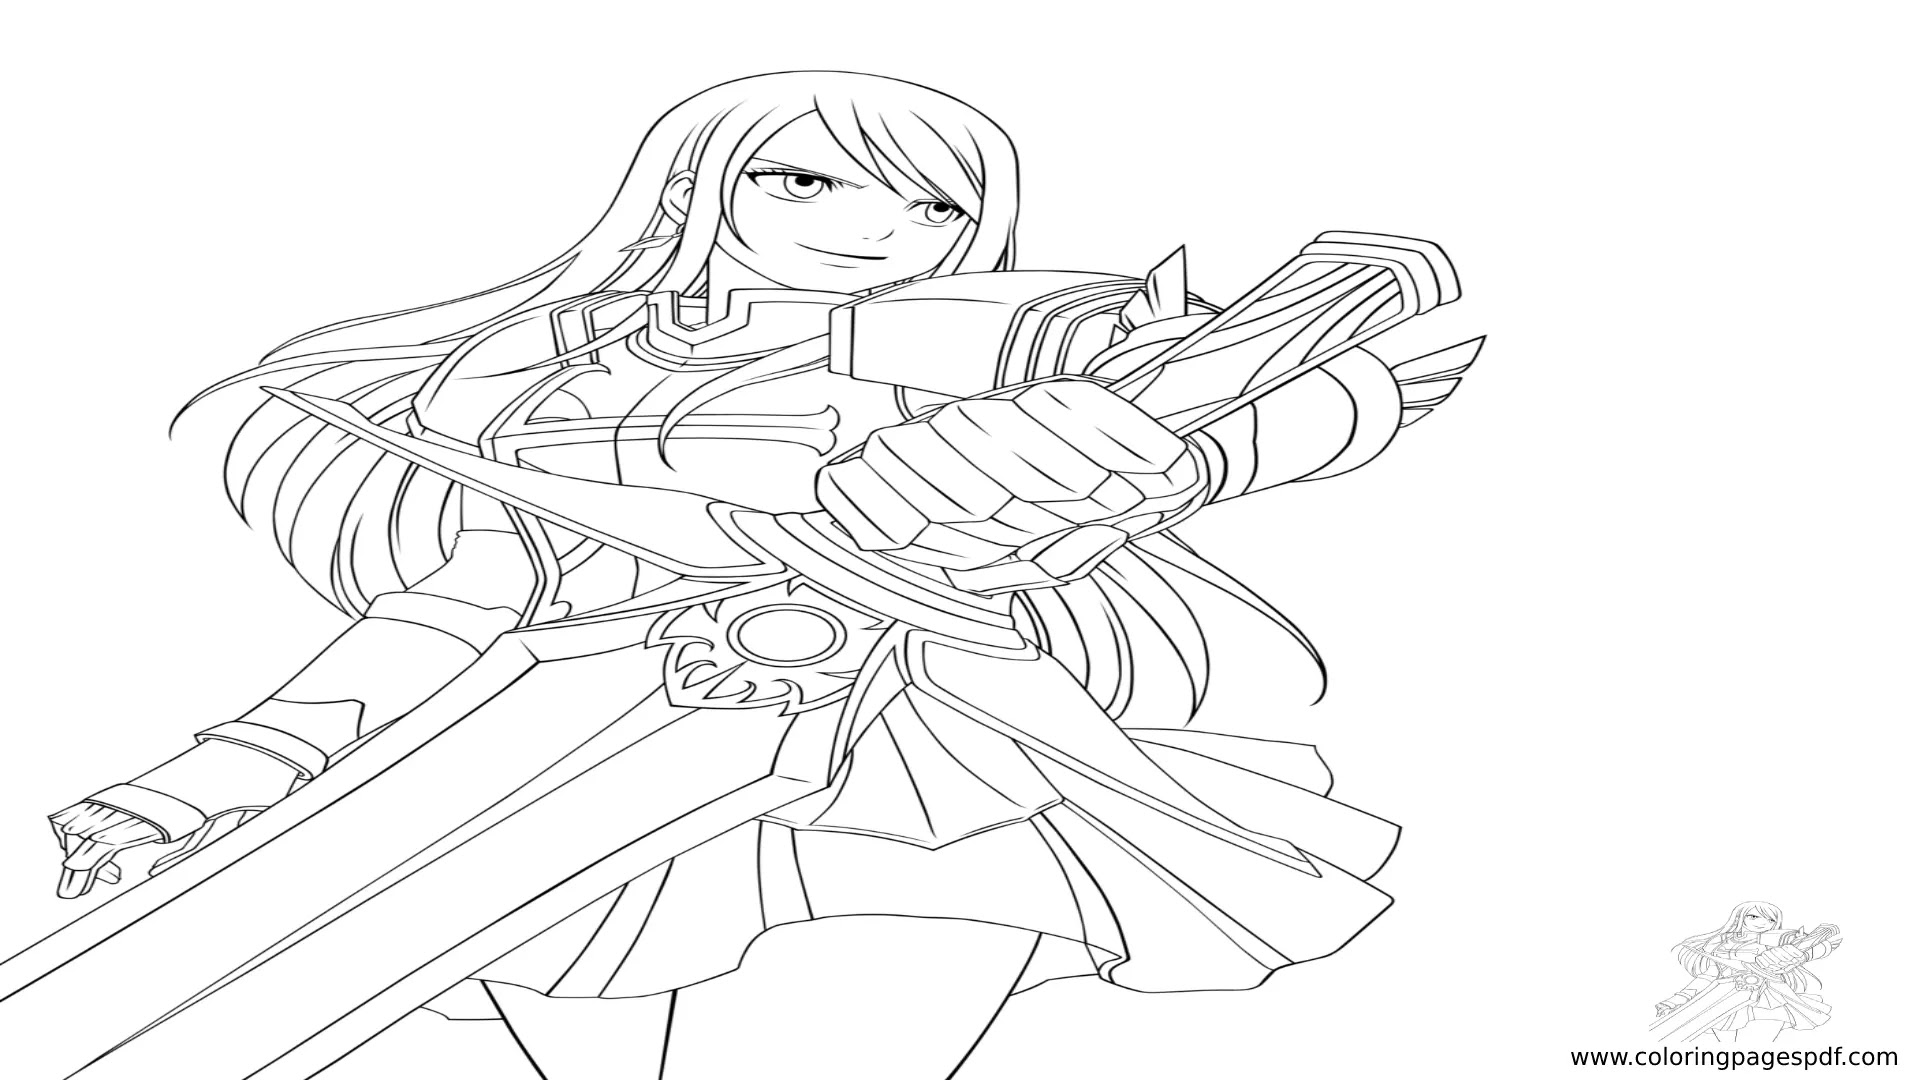 Coloring Page Of Erza Scarlet (Fairy Tail)